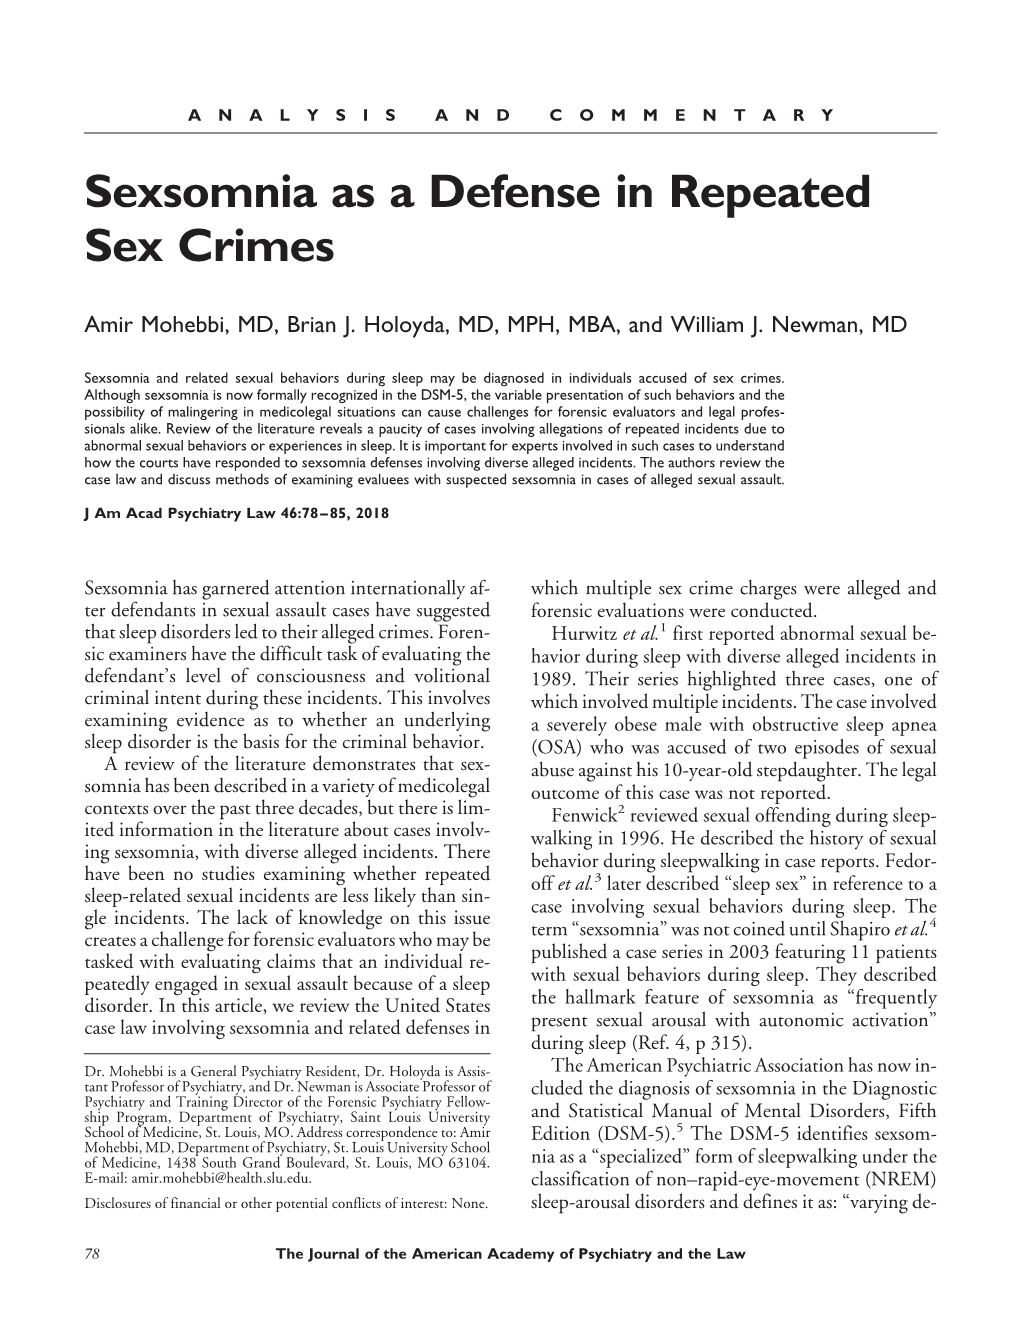 Sexsomnia As a Defense in Repeated Sex Crimes